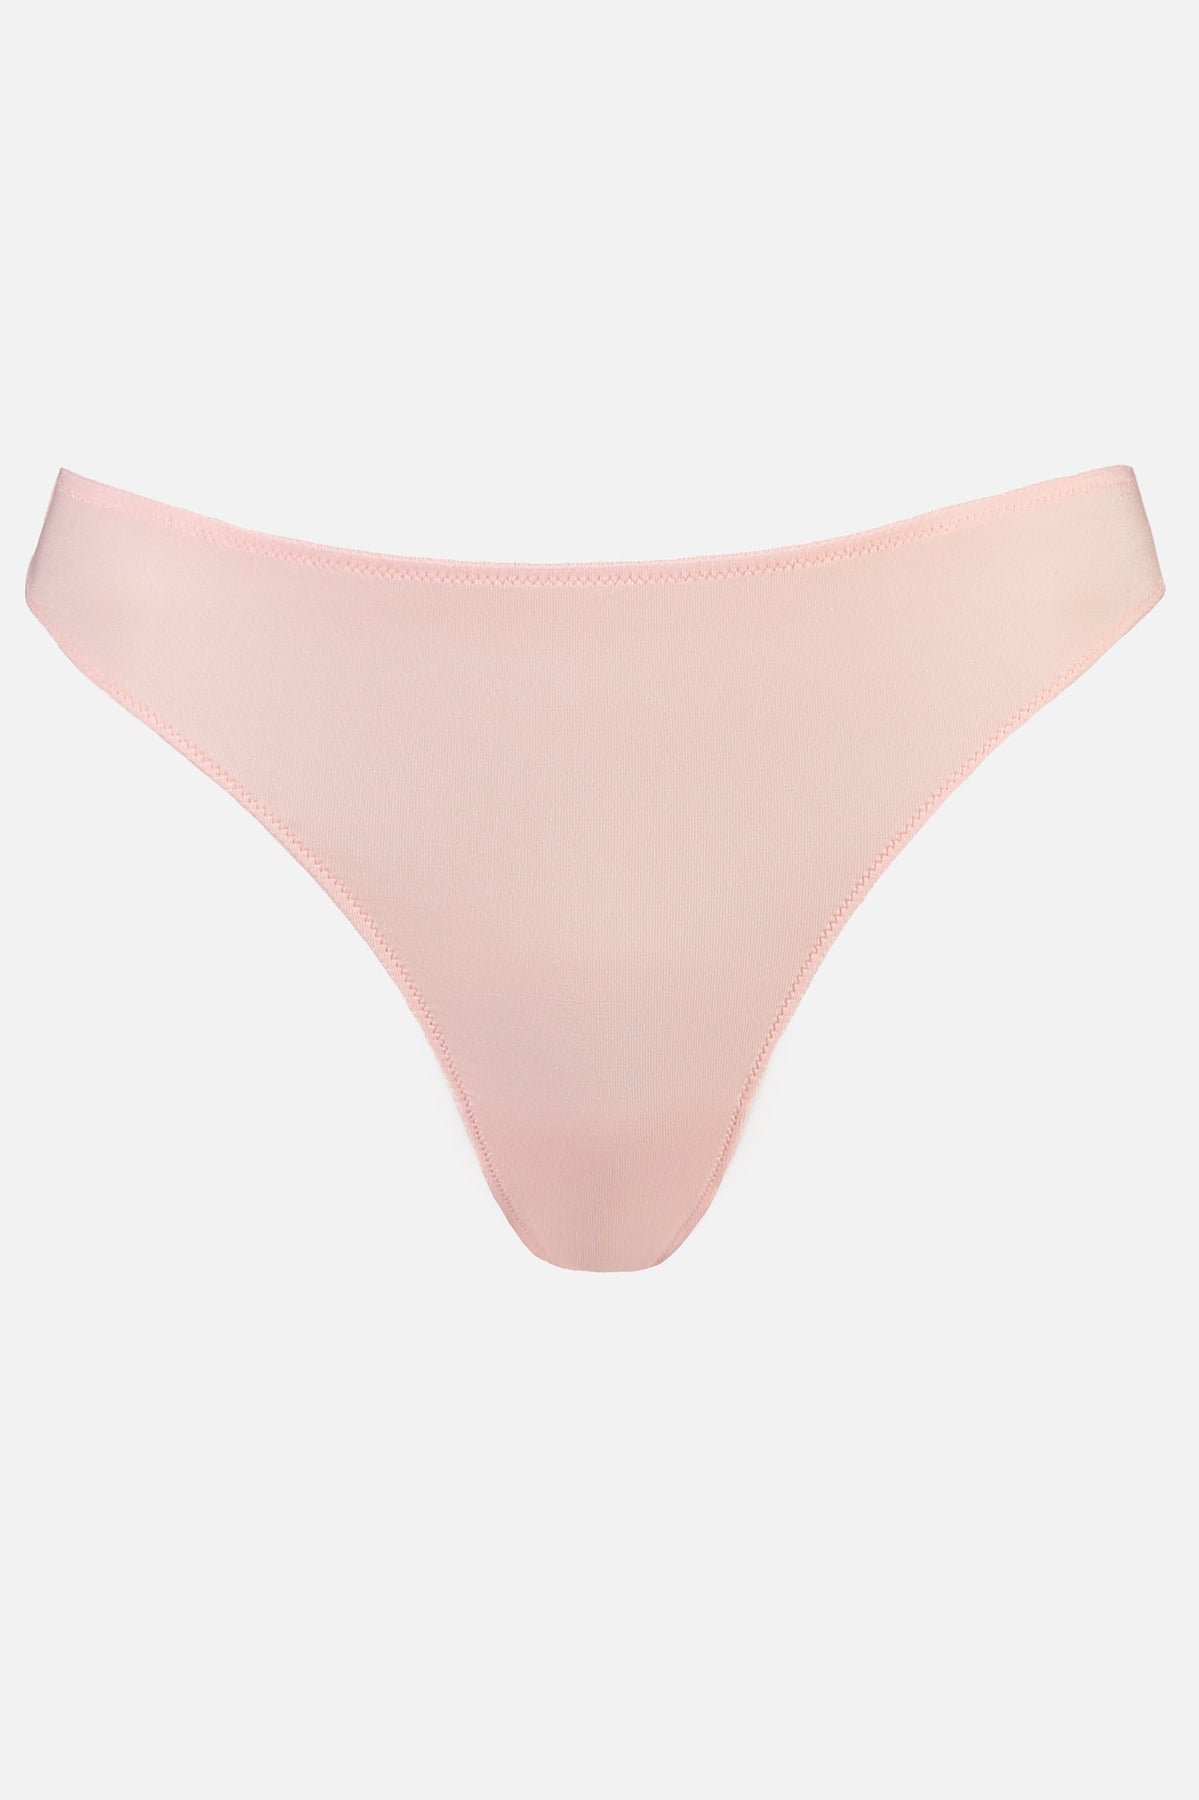 Whitney Thong in Rosy